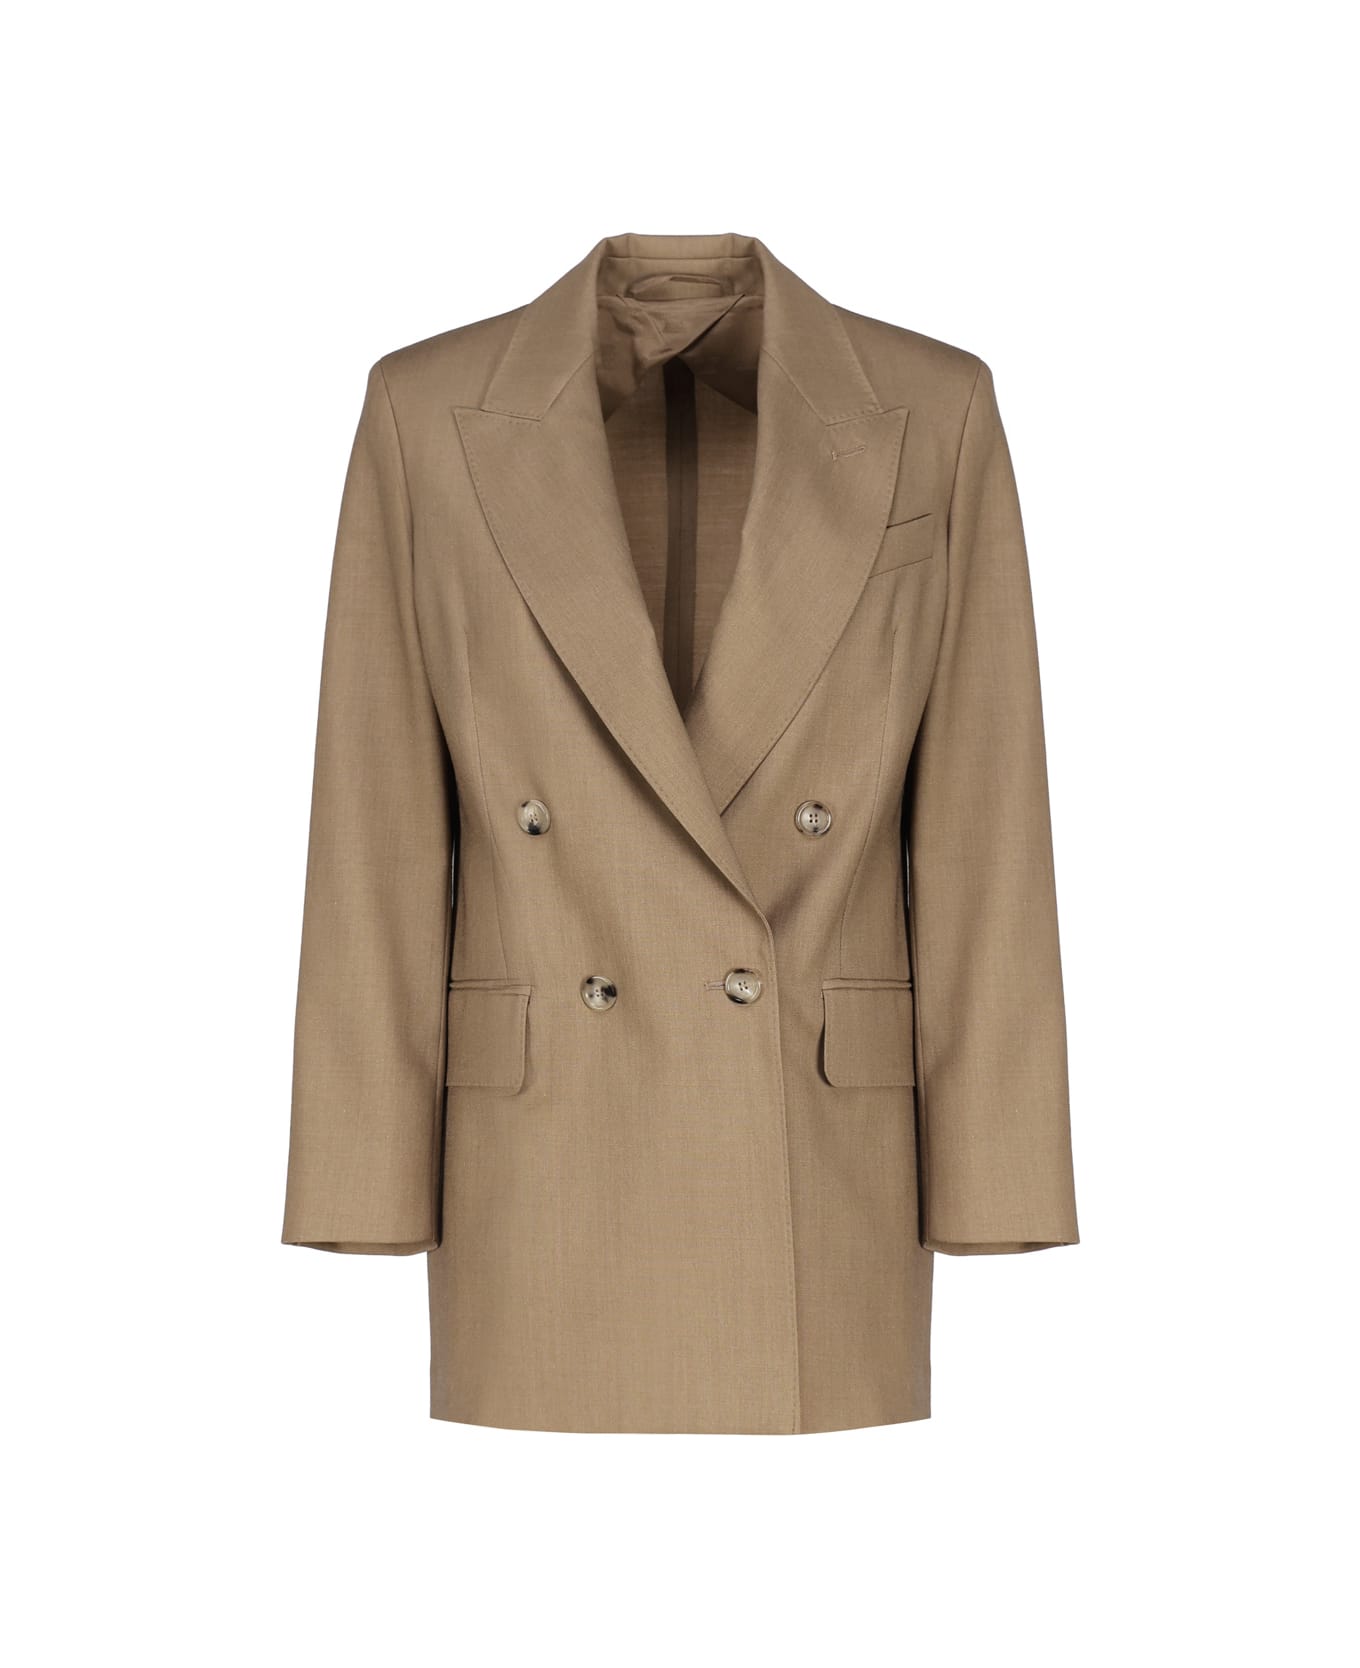 Max Mara Double Breasted Blazer In Wool Blend - Camel